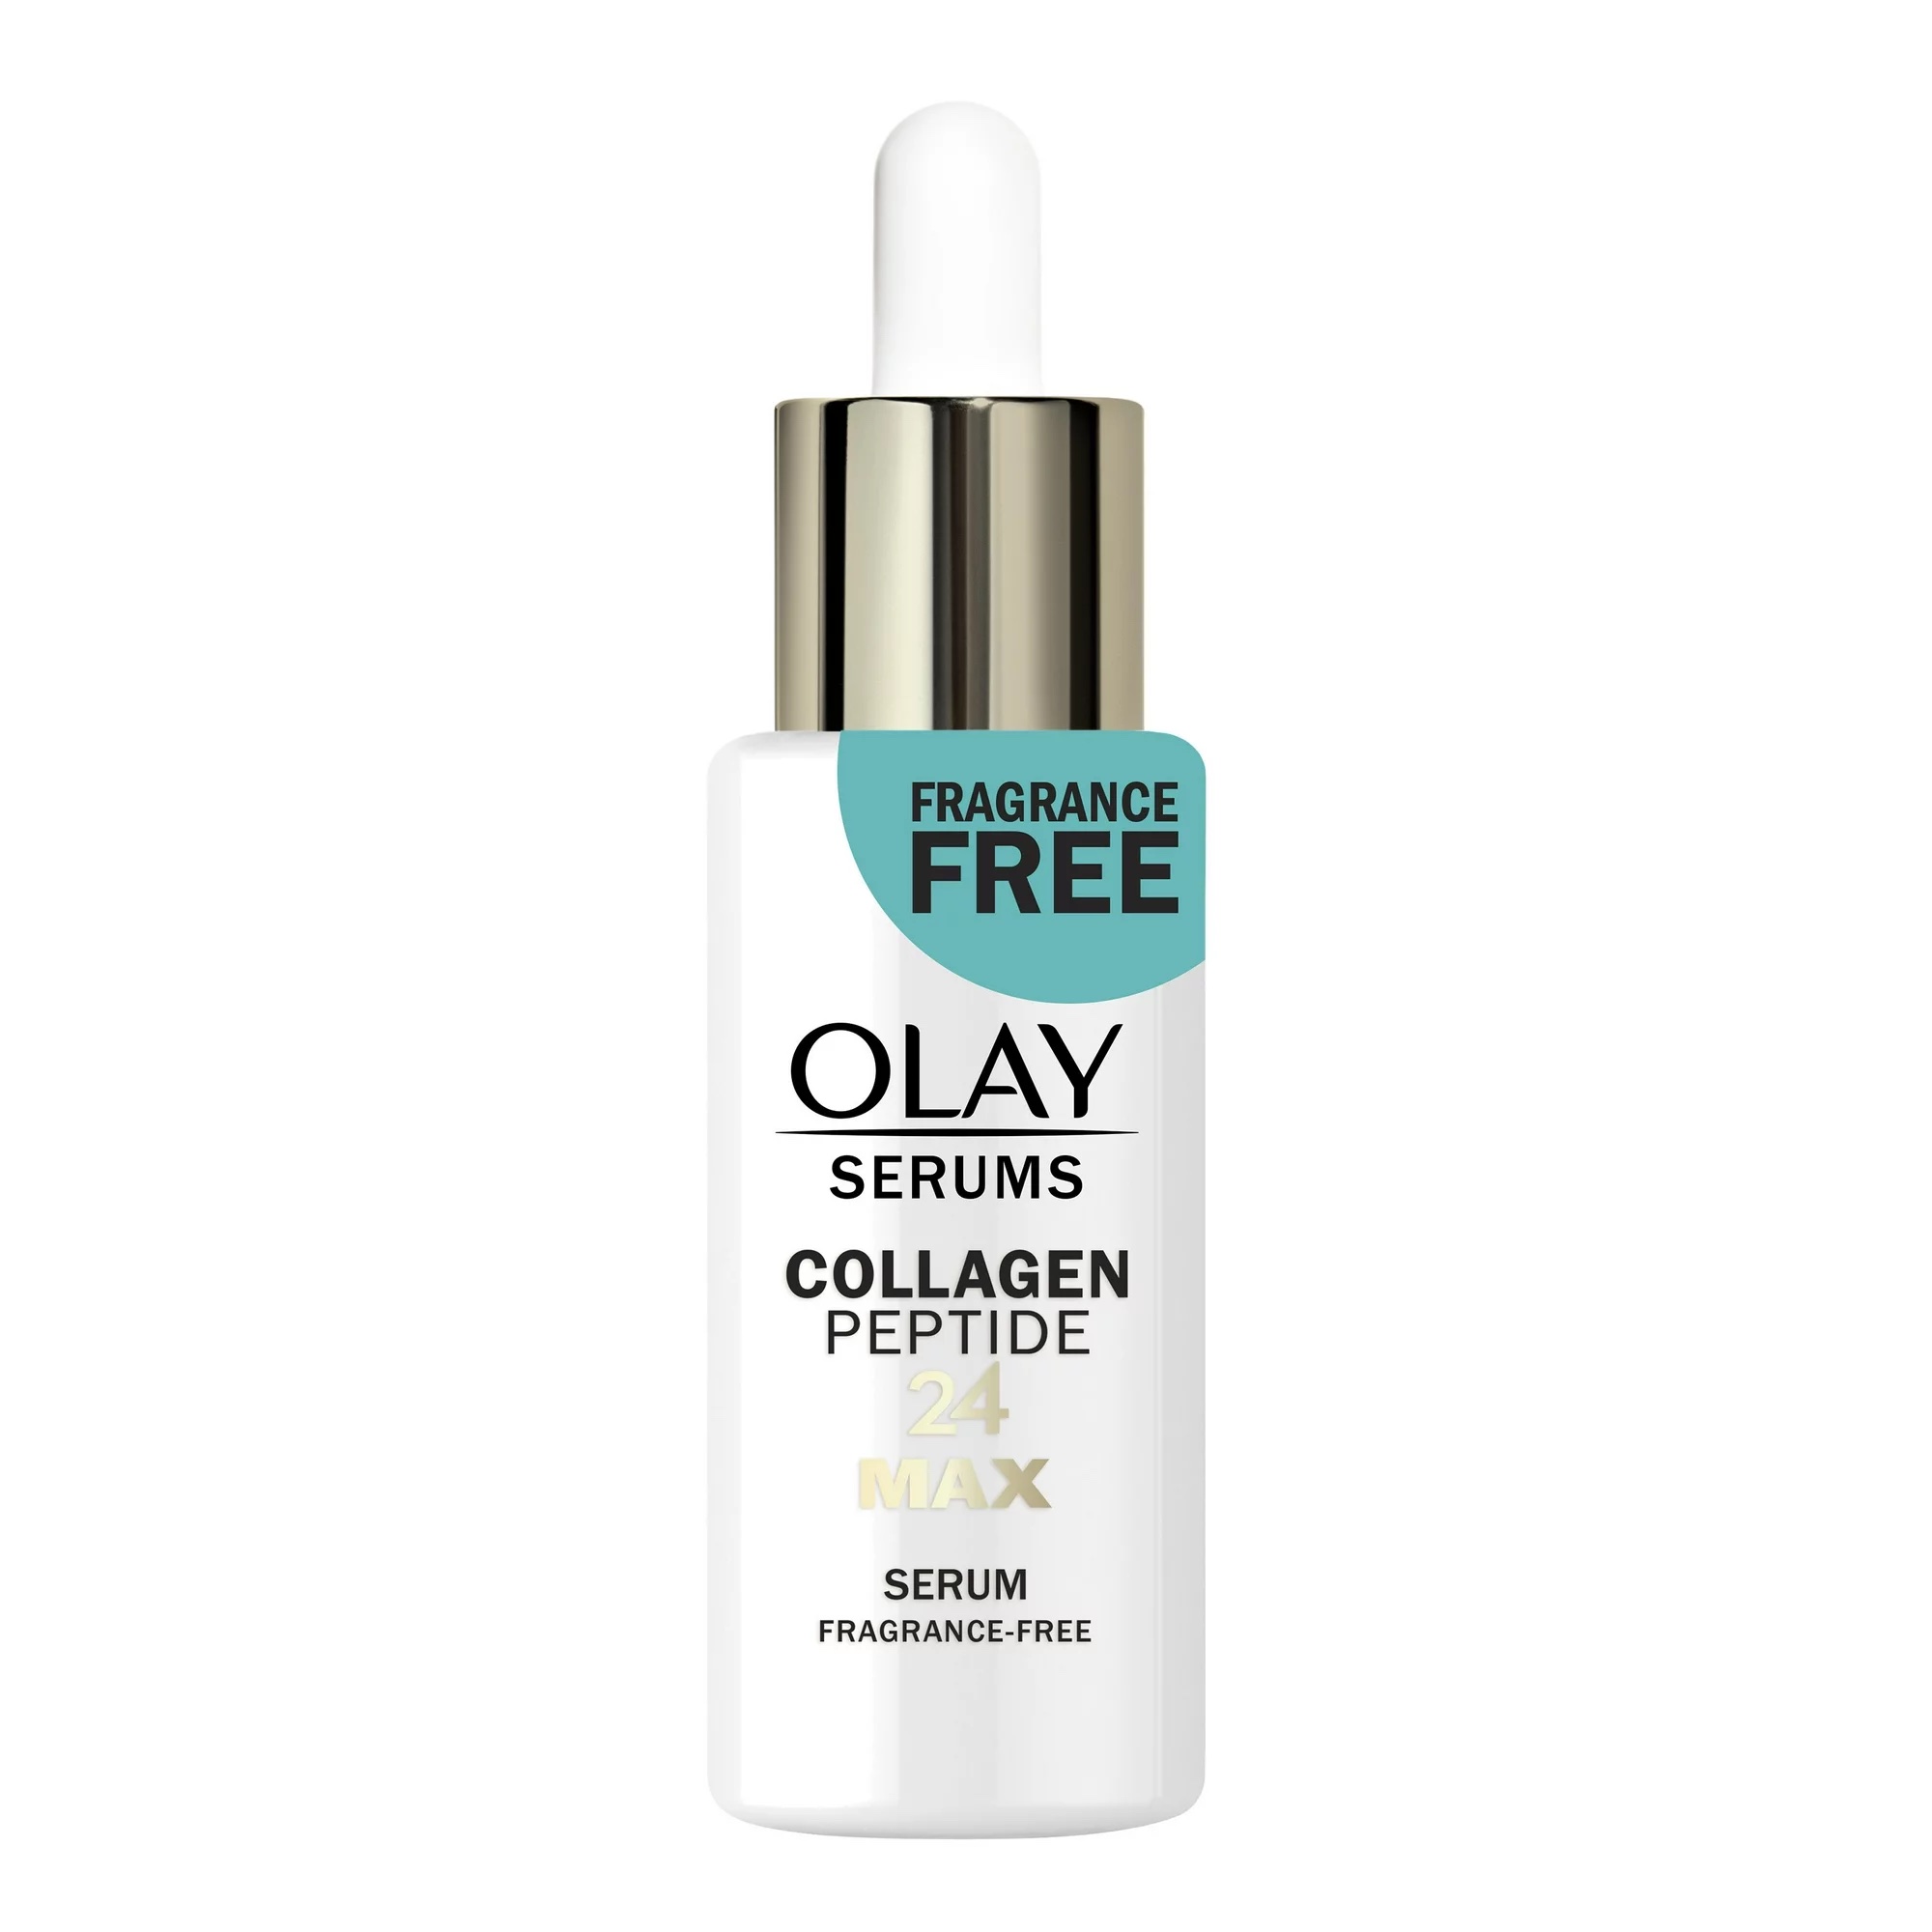 Olay Collagen Peptide 24 MAX סרום ללא ריח